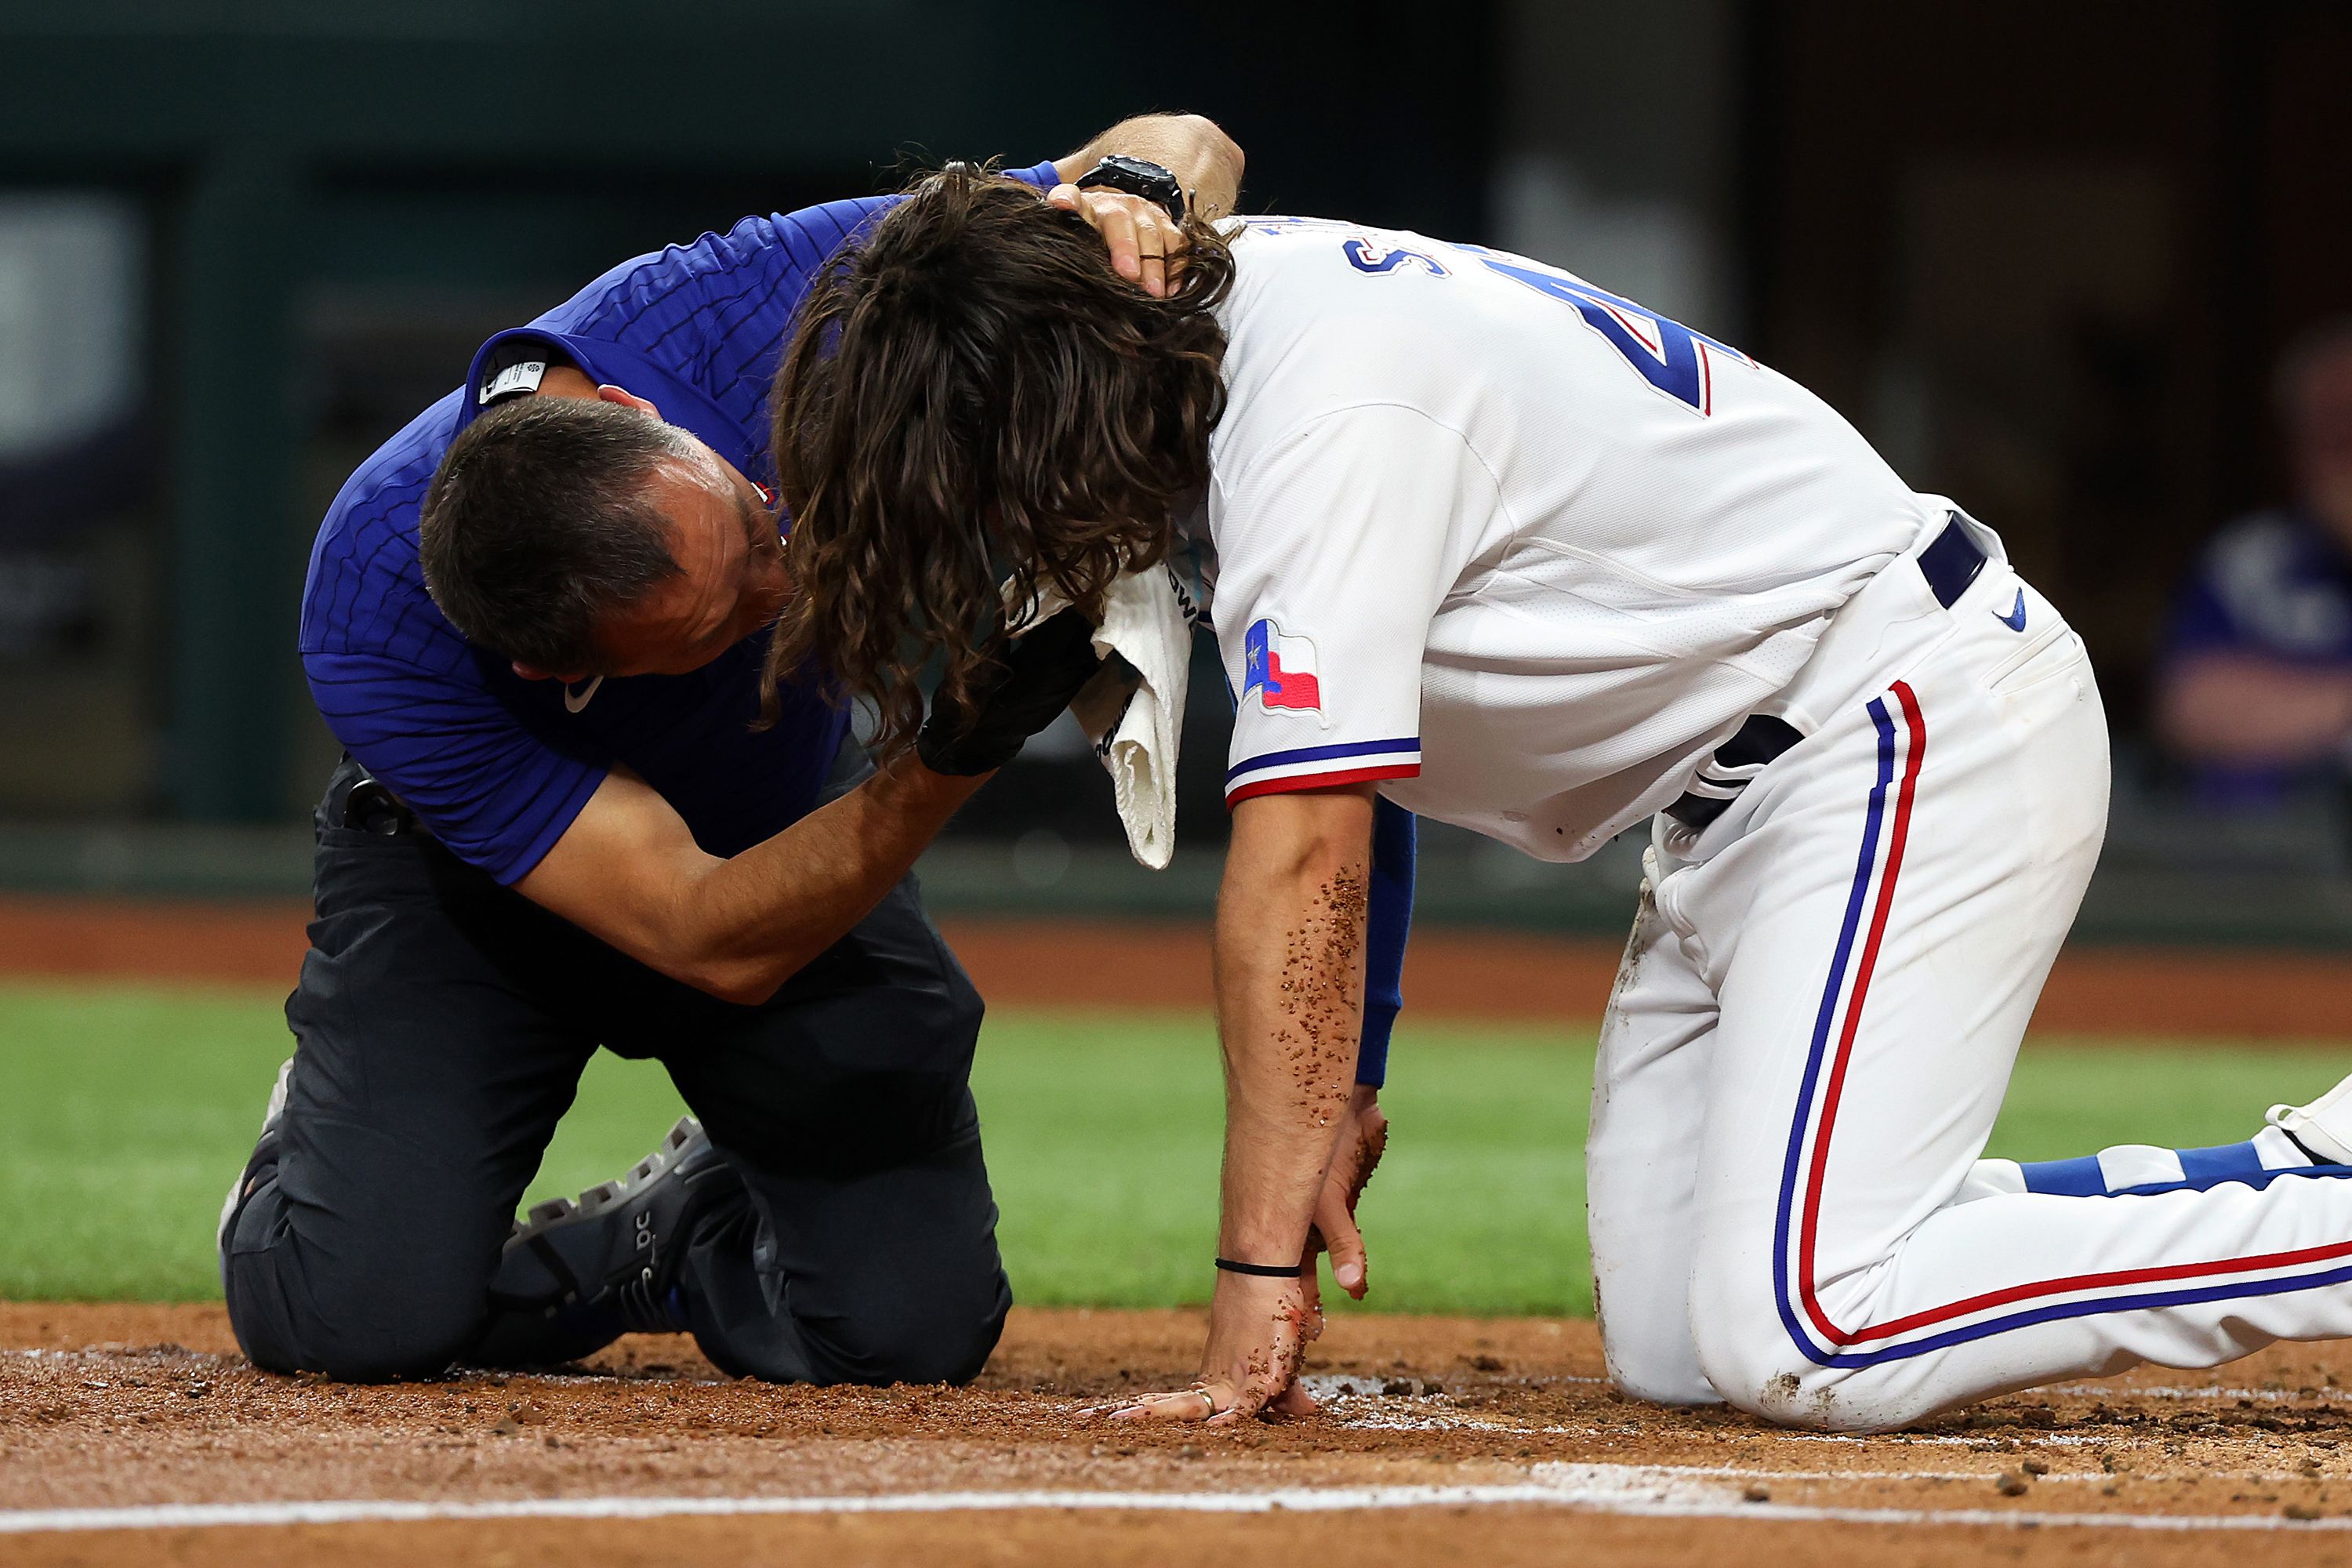 Texas Rangers player Josh Smith hospitalized after taking a pitch